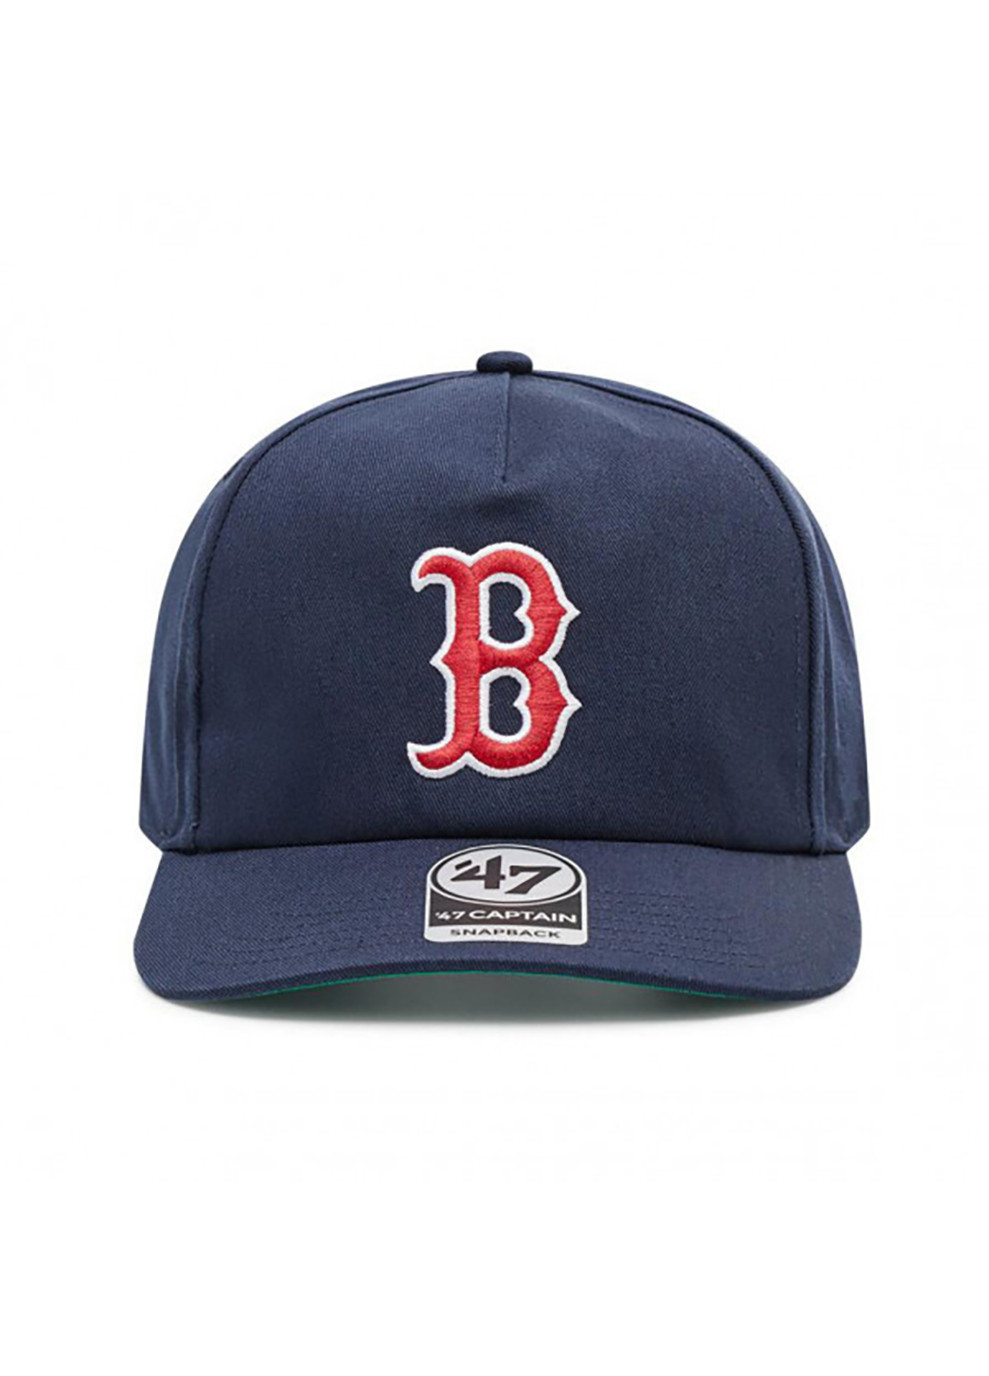 Кепка-snapback BOSTON RED SOX CAPTAIN DTR One Size Blue/ green 47 Brand (258131712)